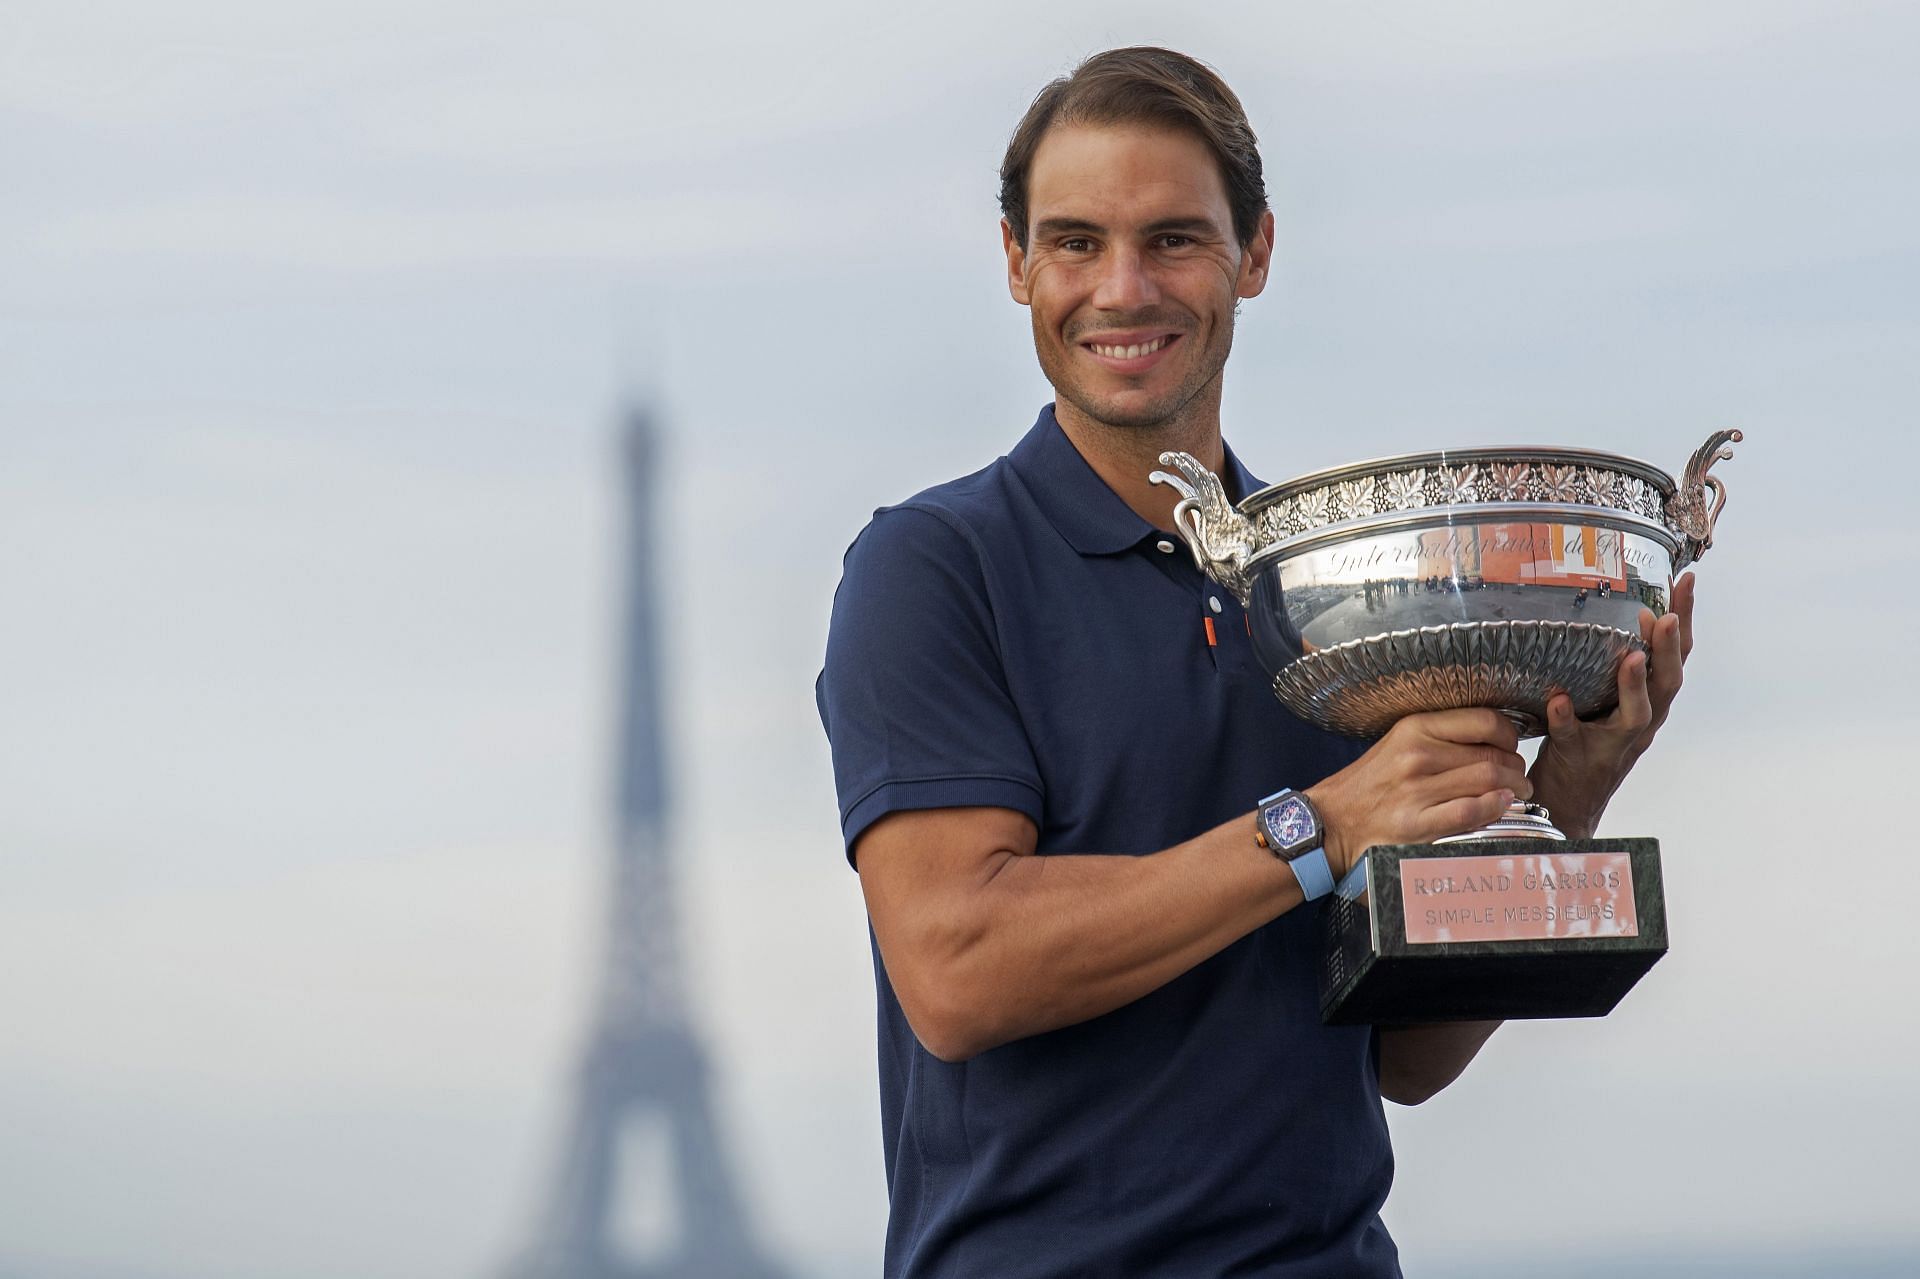 Rafael Nadal is both one of the youngest and oldest winners at Roland Garros.